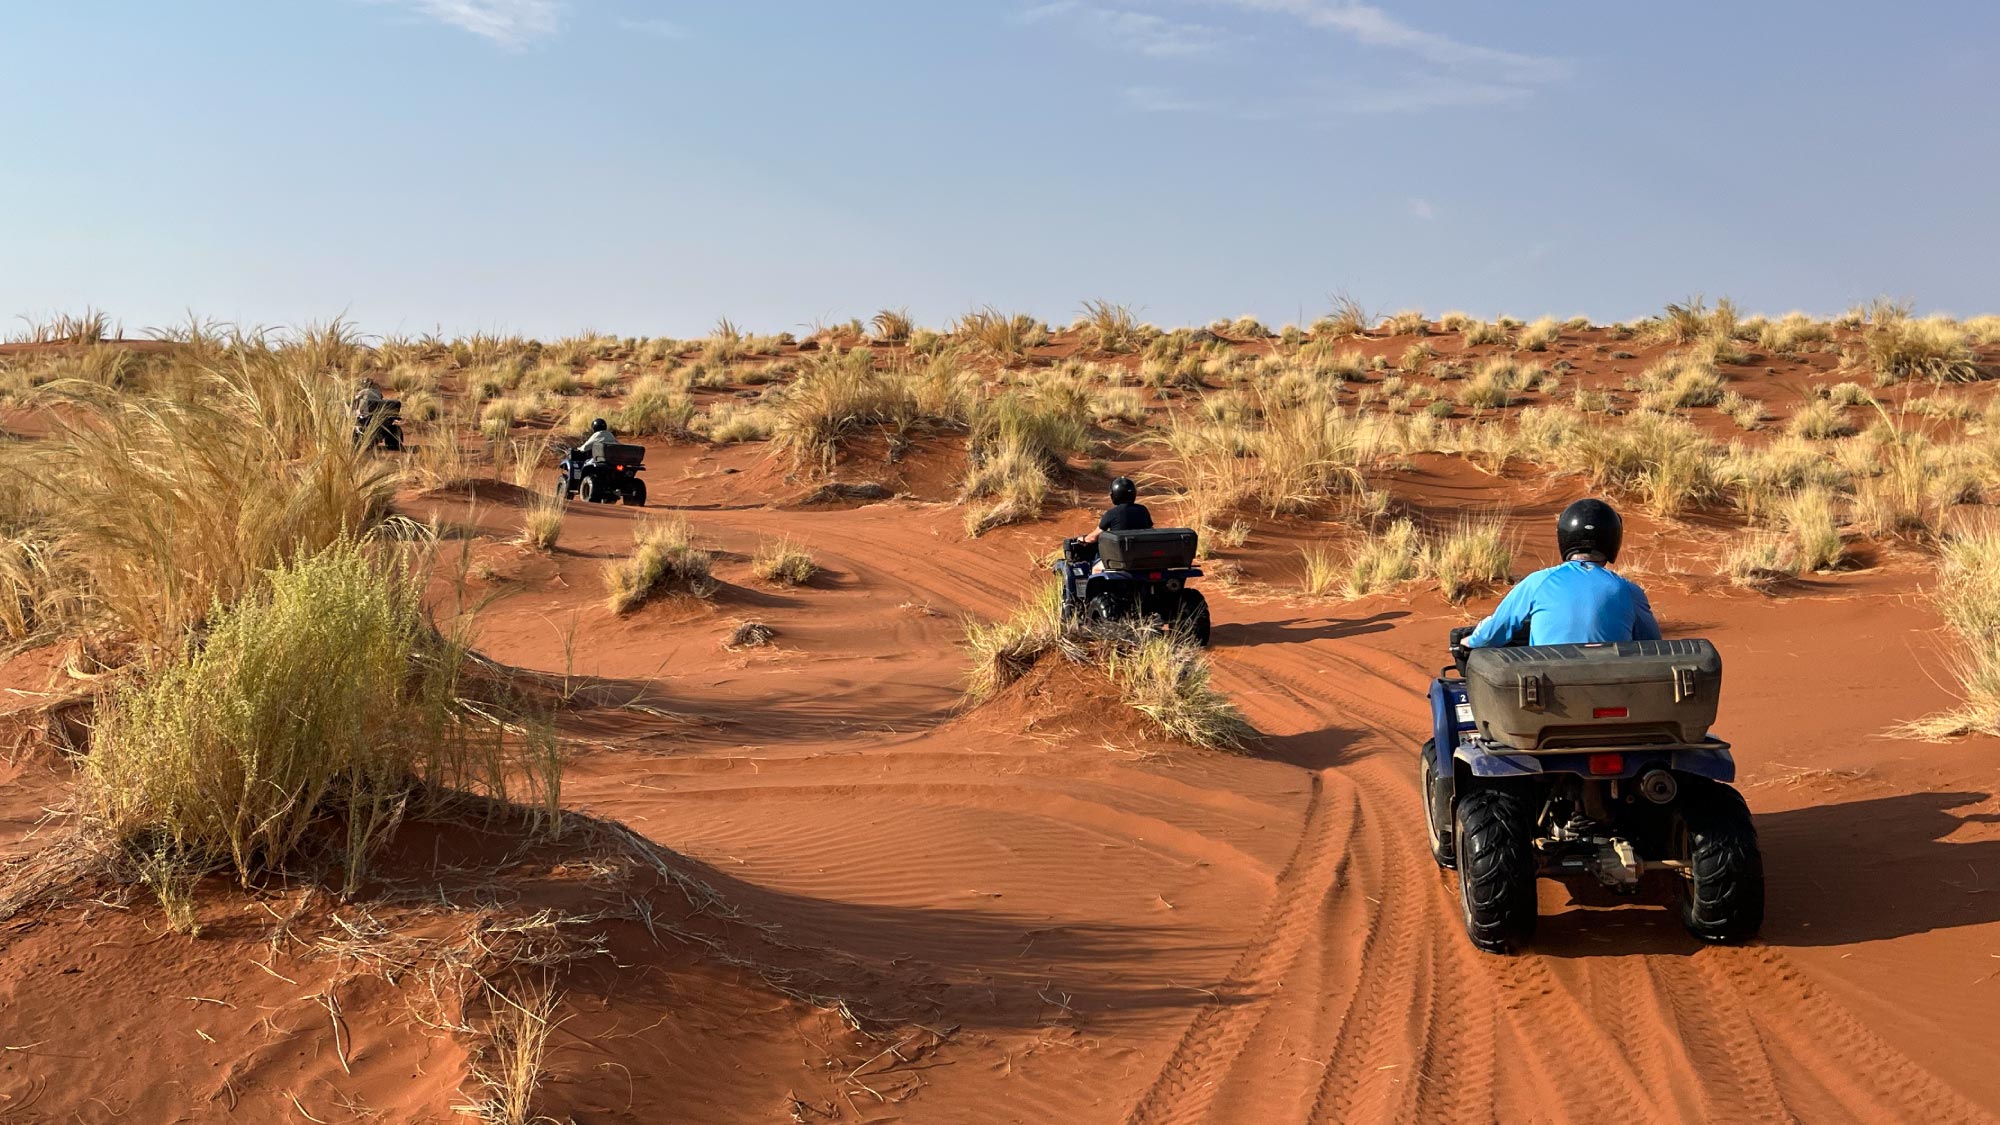 Fly over the stunning Namib Desert in Namibia for a pilot's adventure of a lifetime. Experience the thrill of a 4x4 motorcycle ride through the iconic red dunes, a must-do journey for those who own their own airplane.